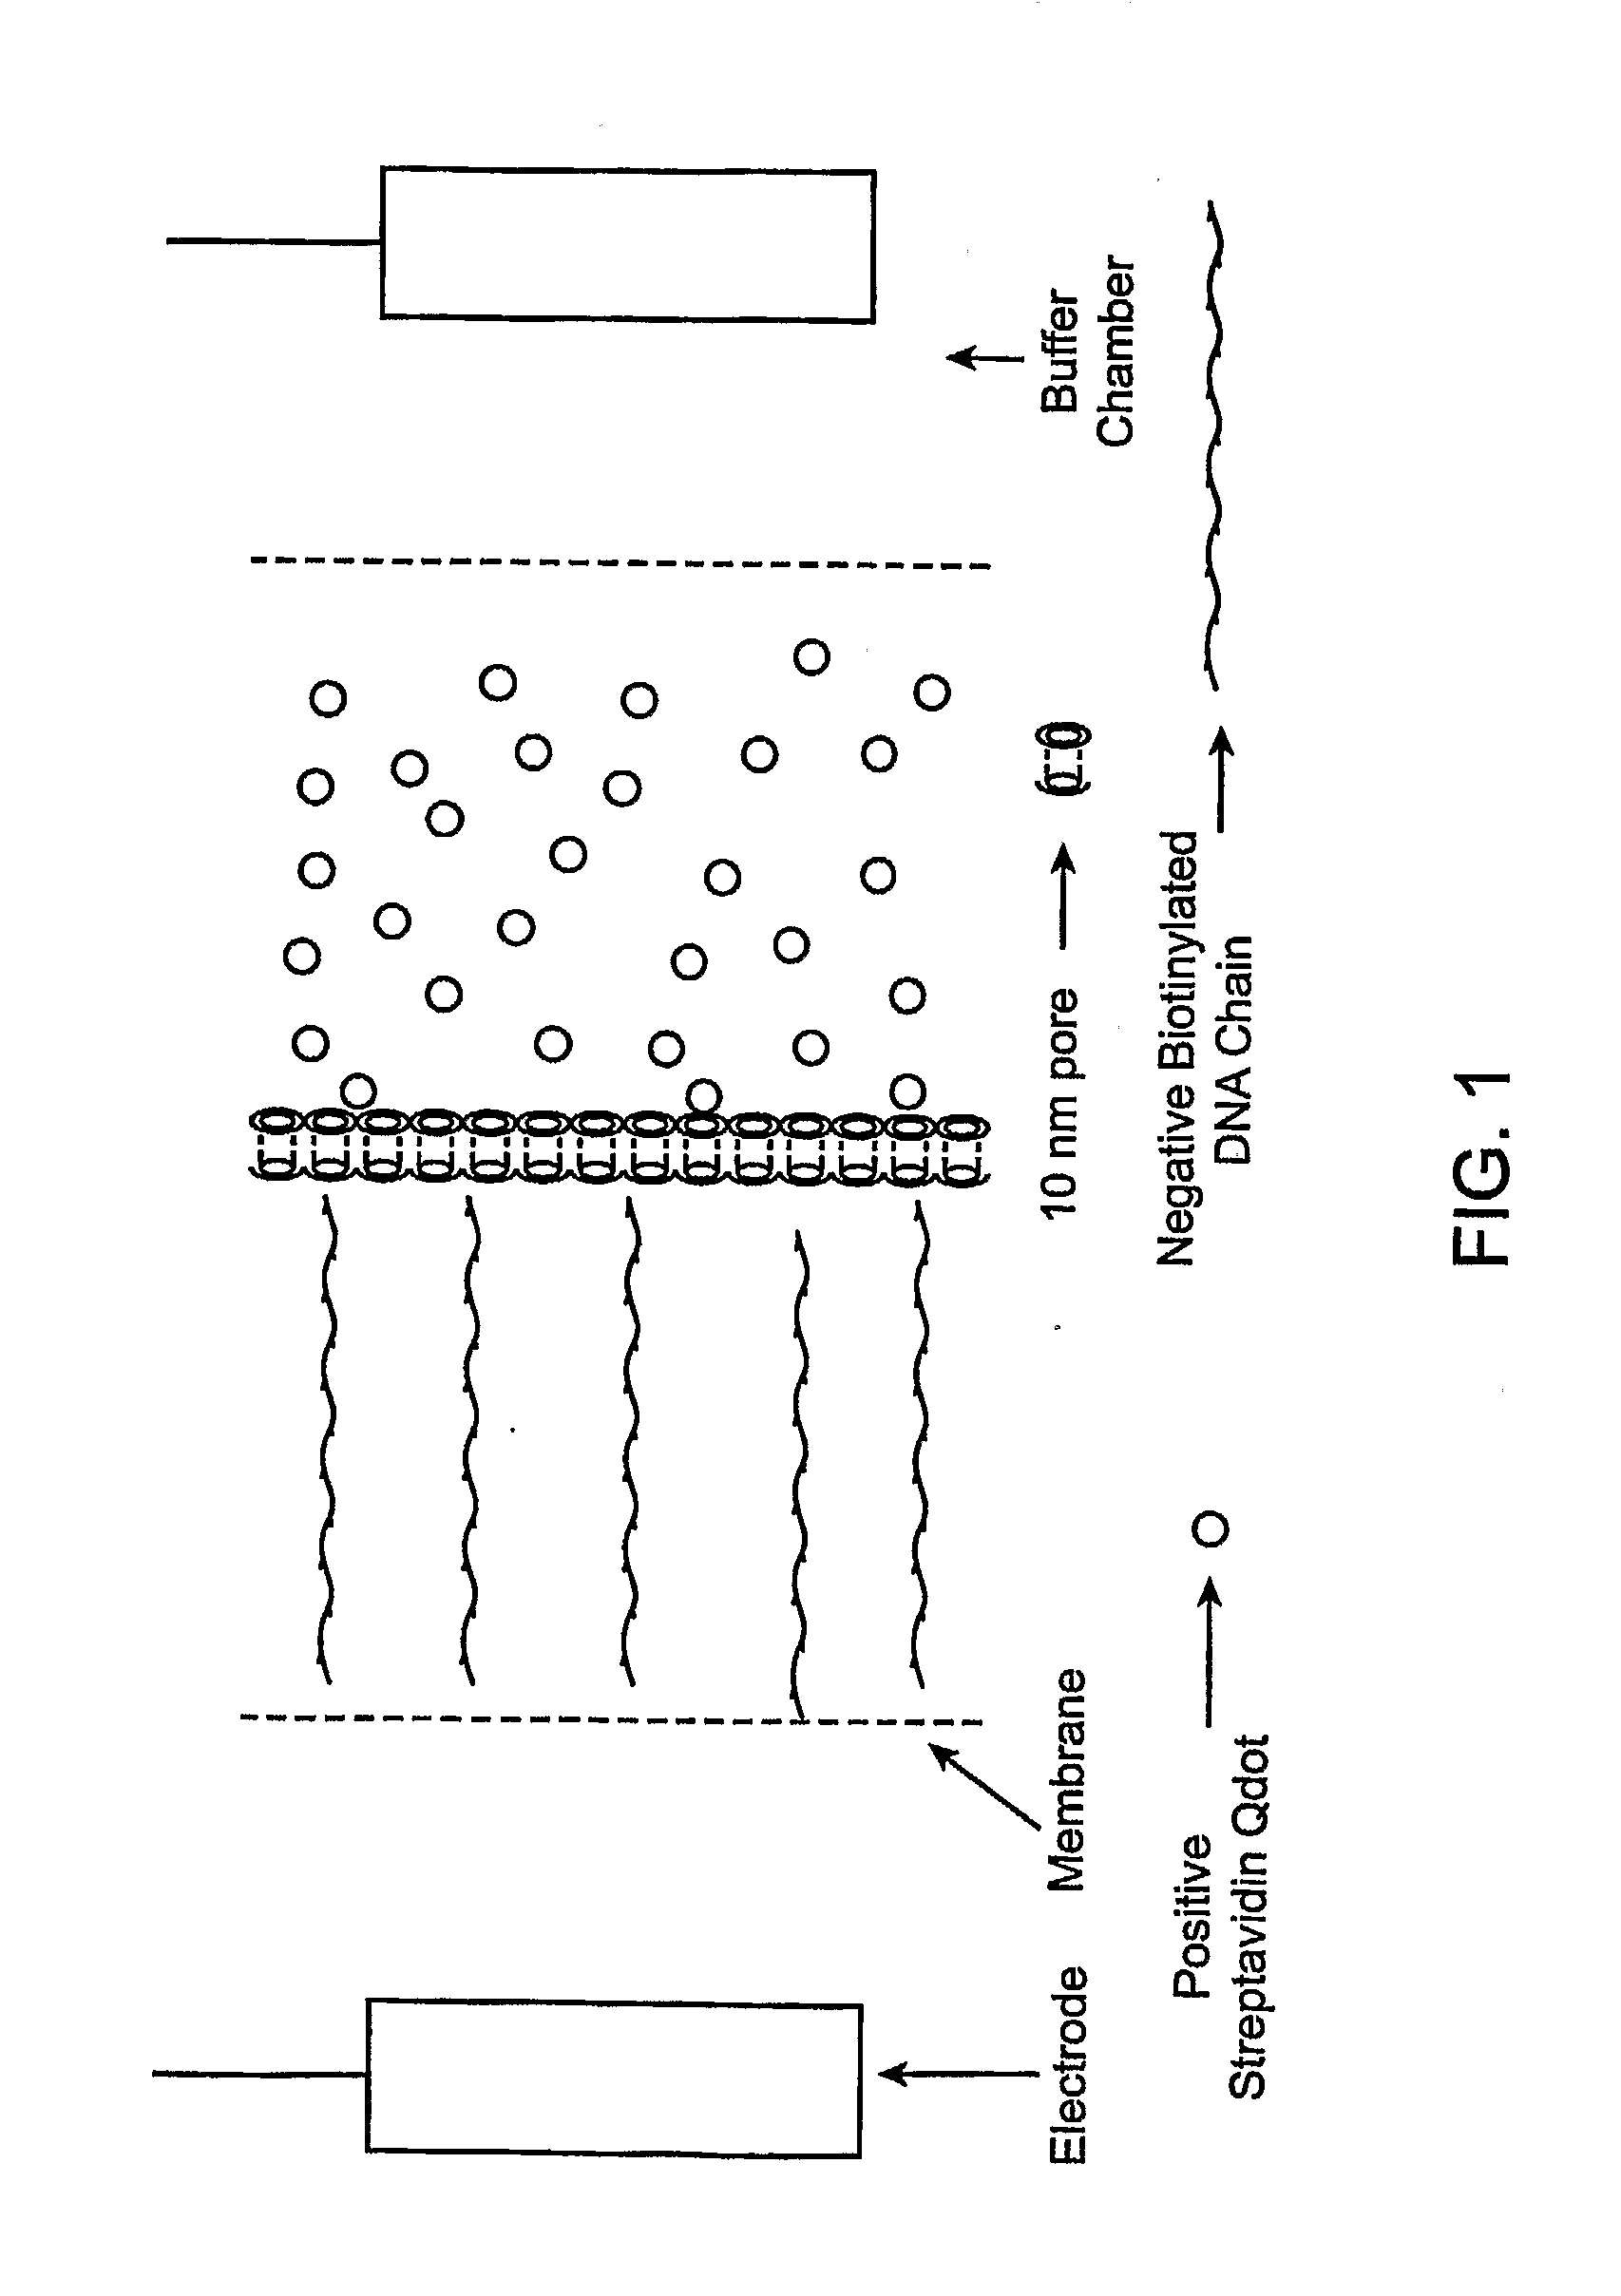 Nanofabrication processes and devices for the controlled assembly of functionalized nanostructures